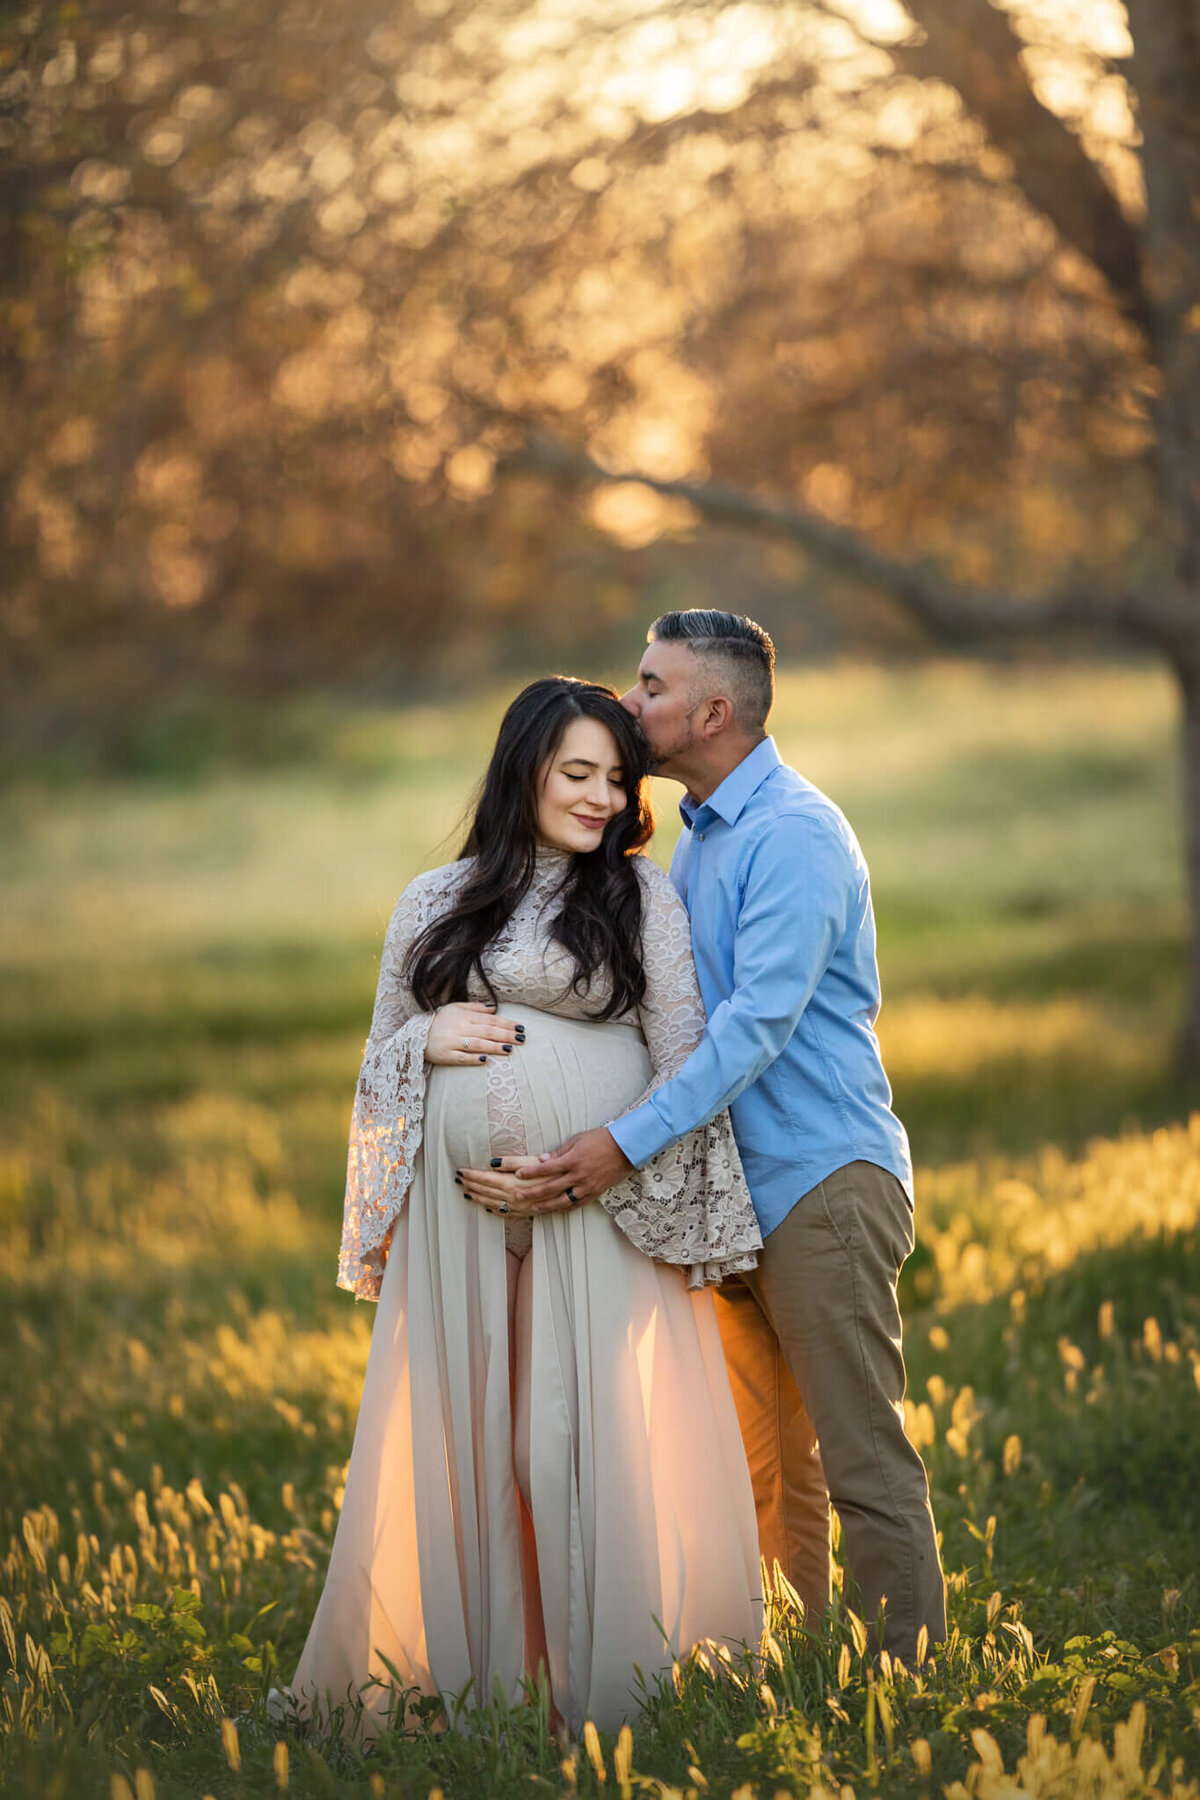 New mom and dad to be at sunset in photoshoot with Elsie Rose Photography